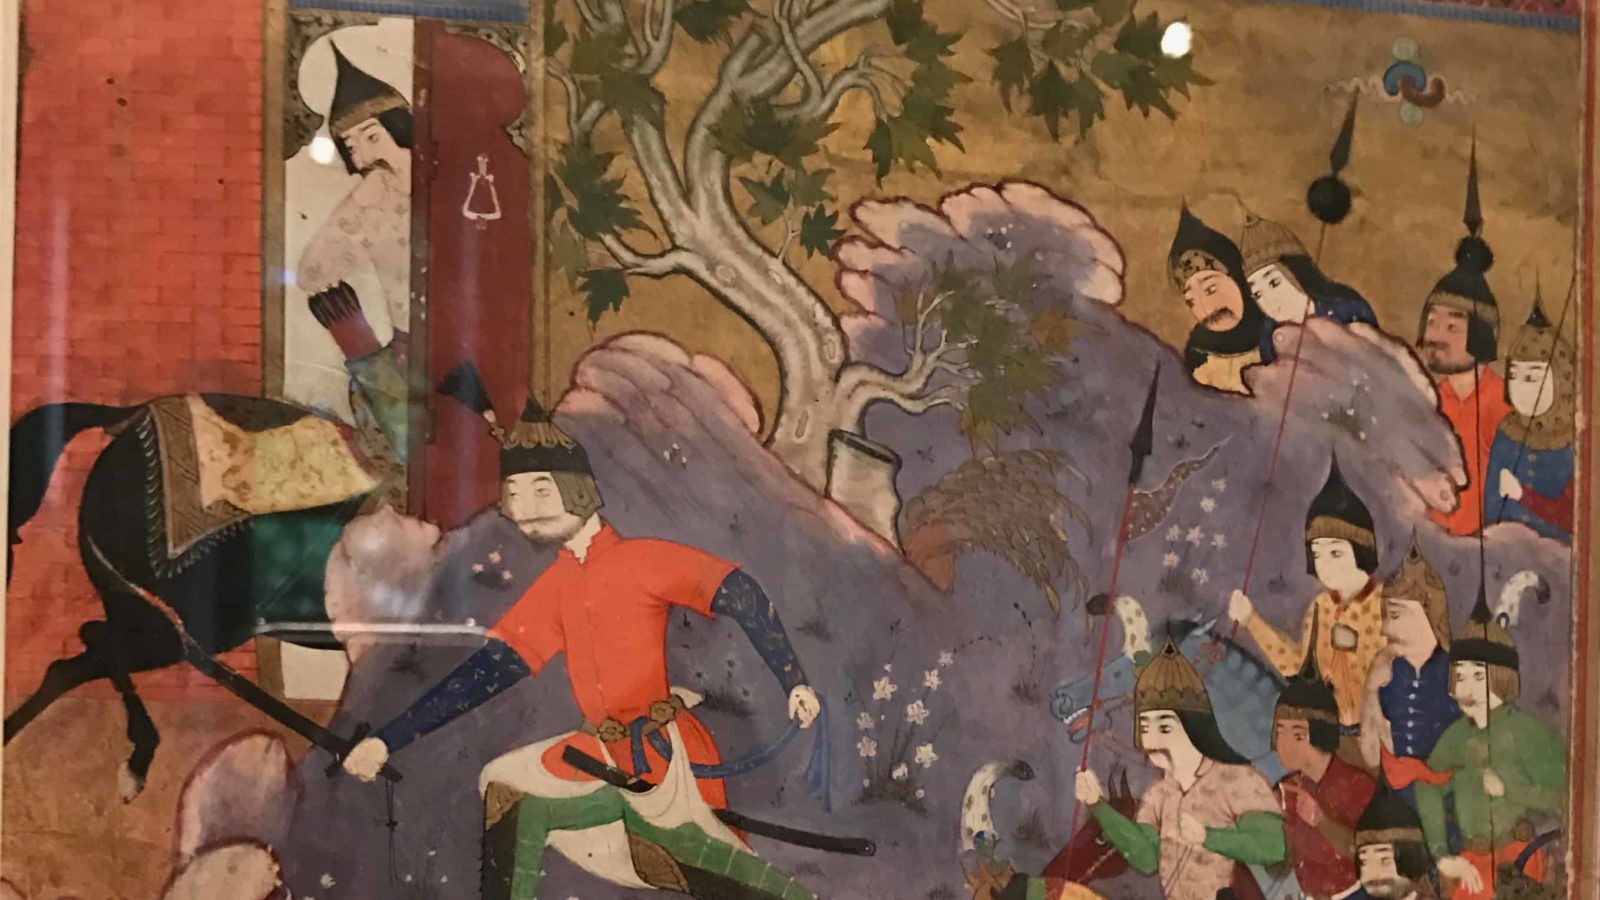 Illustration from a manuscript of Firdwasi's Shahnameh, Iranian, probably Qazvin, Safavid dynasty (1501-1732) at the Yale Art Museum in New Haven